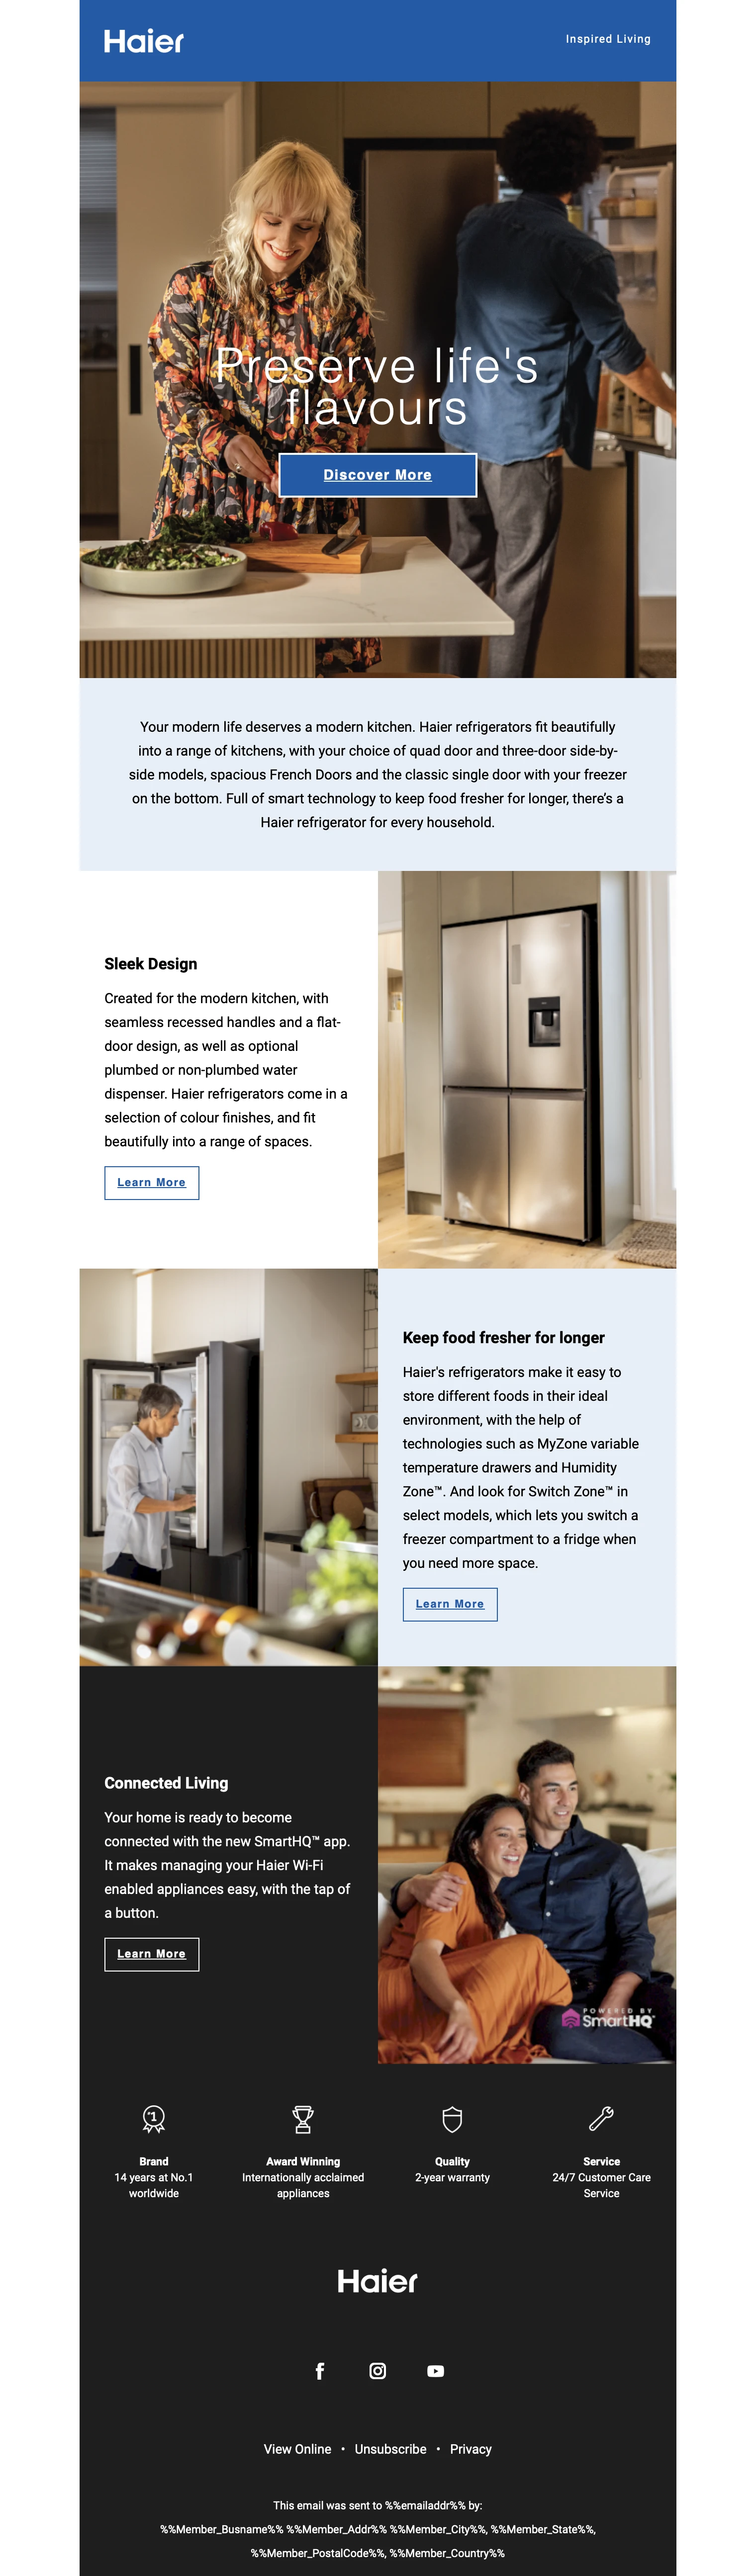 Fisher & Paykel email example for their Haier brand